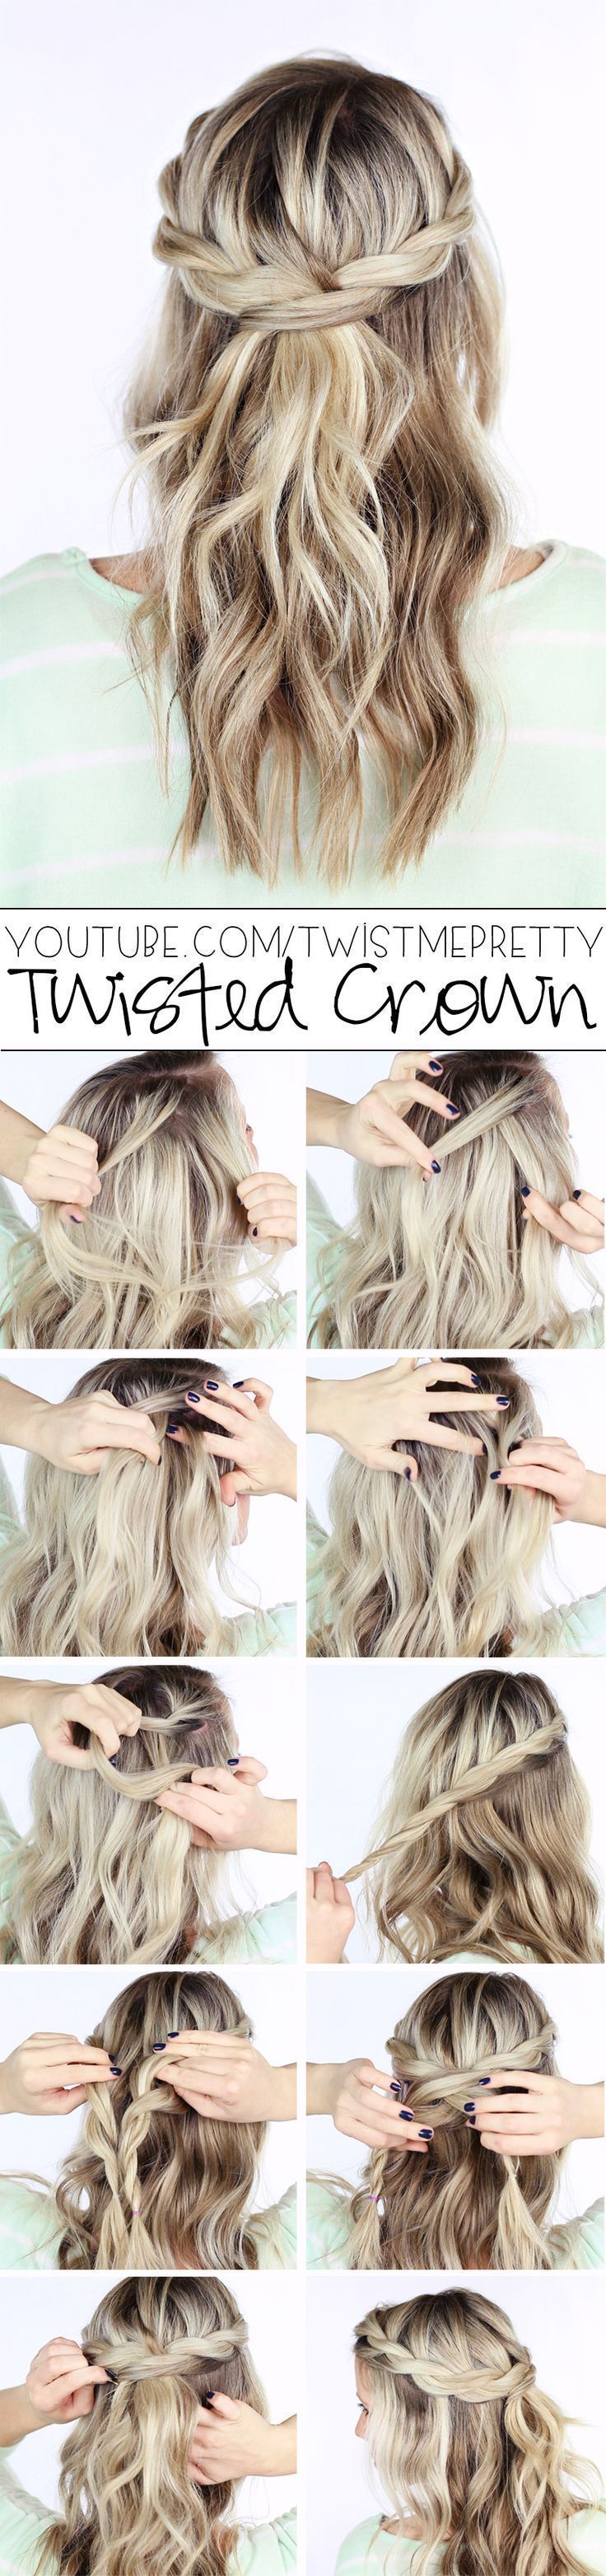 Twisted Half Up Half Down Hairstyle Tutorial